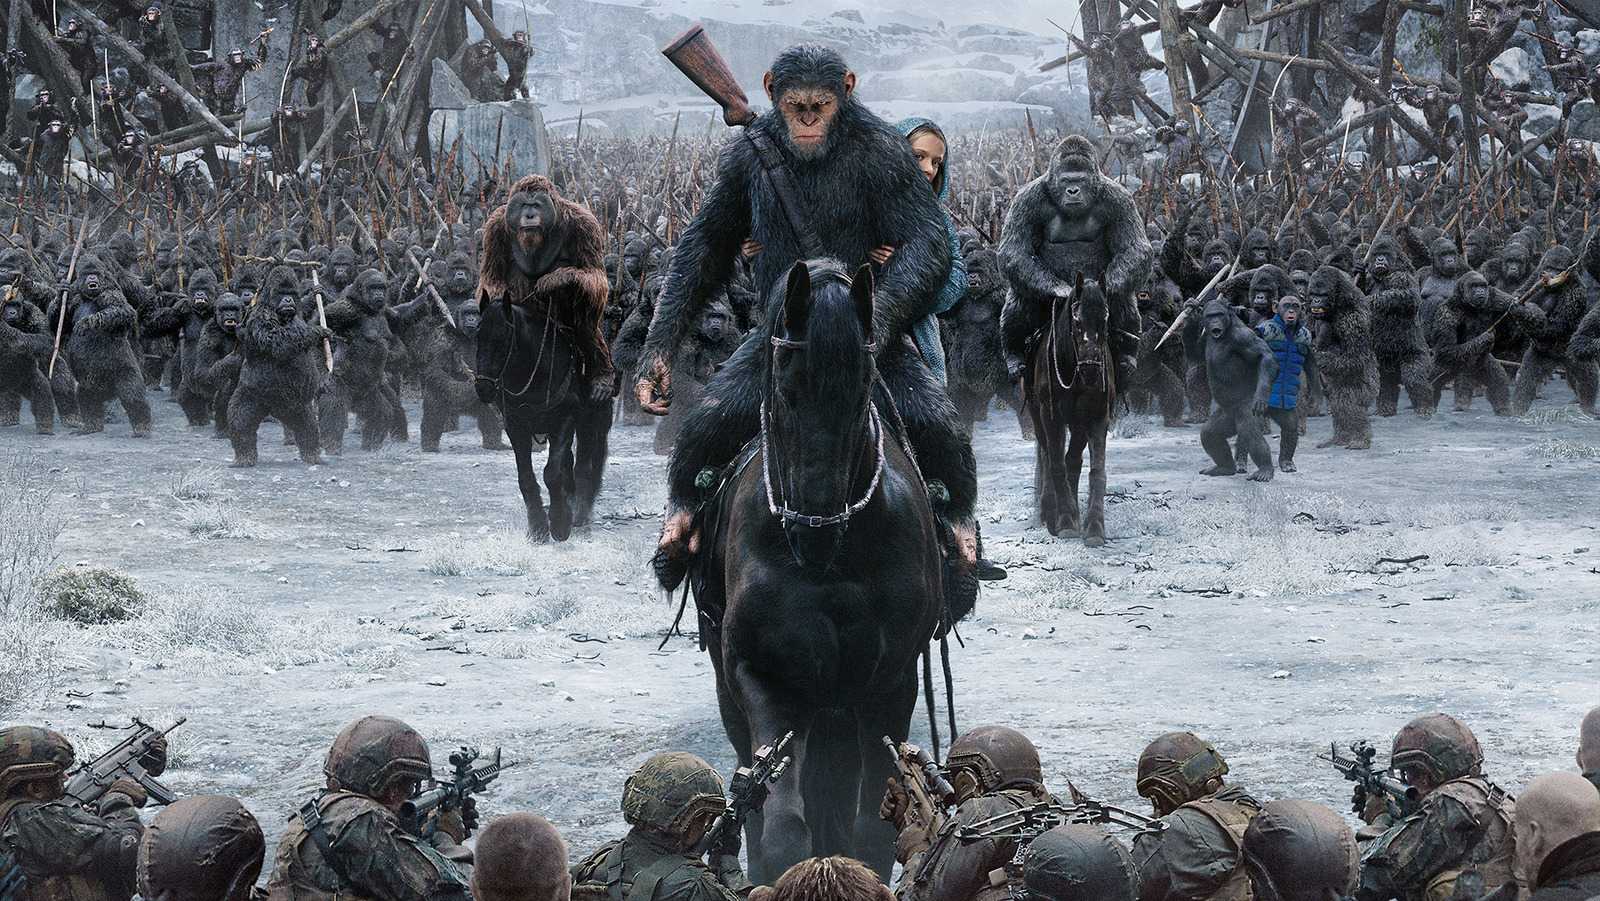 An image from War for the Planet of the Apes (2017)